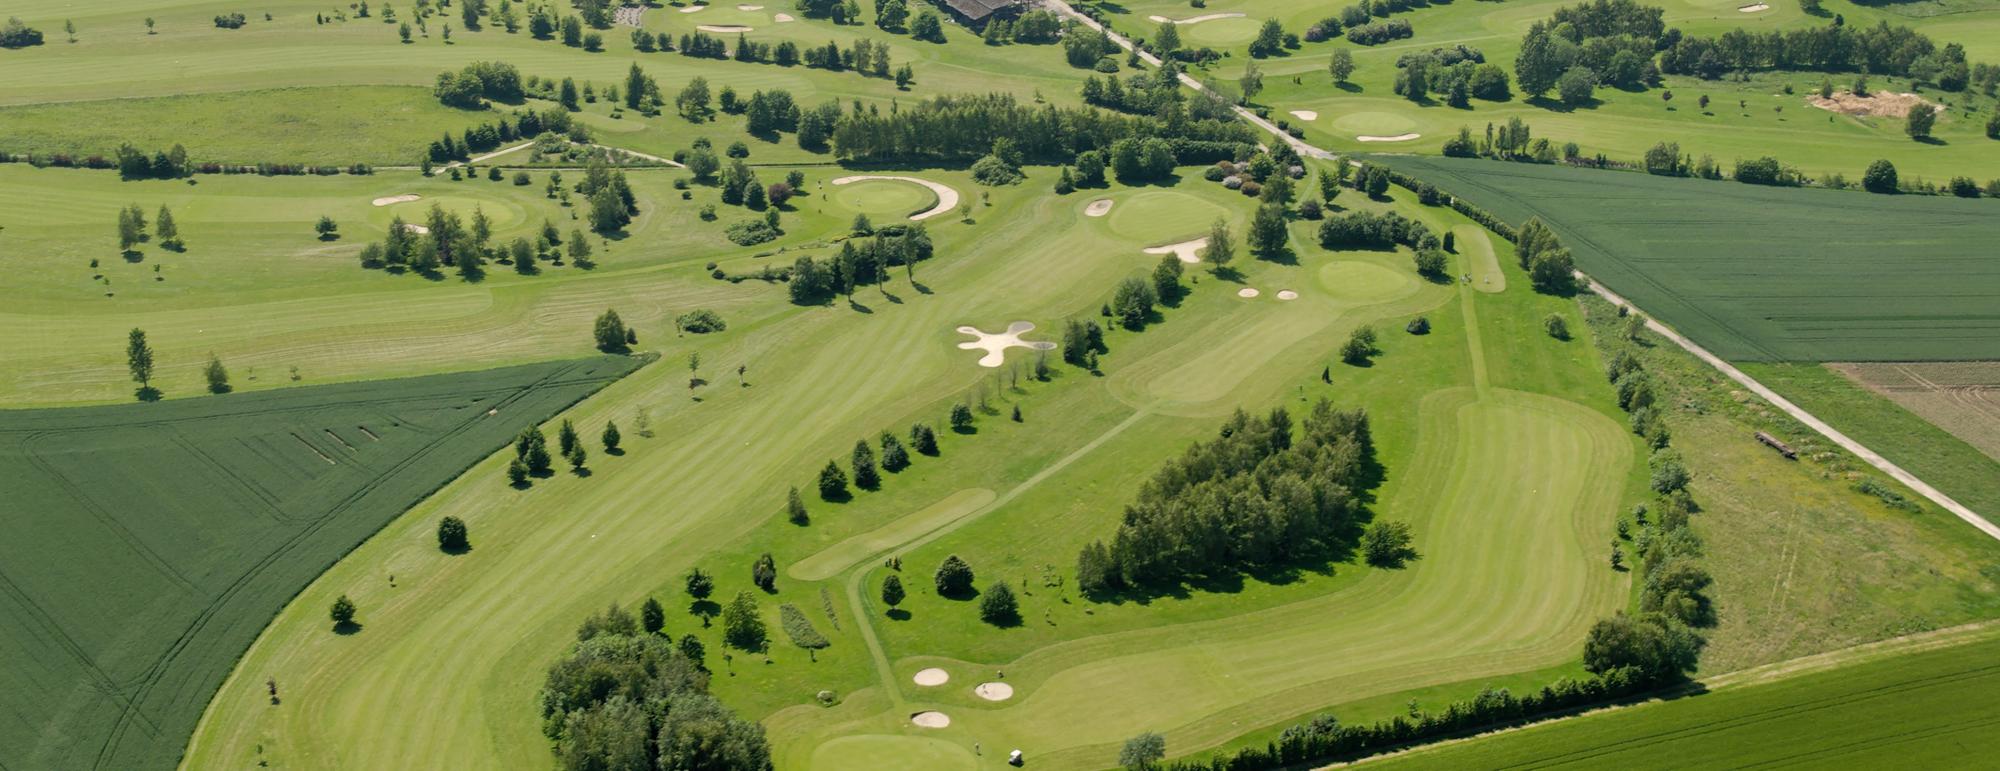 Golf La Bruyere carries several of the finest golf course around Brussels Waterloo & Mons